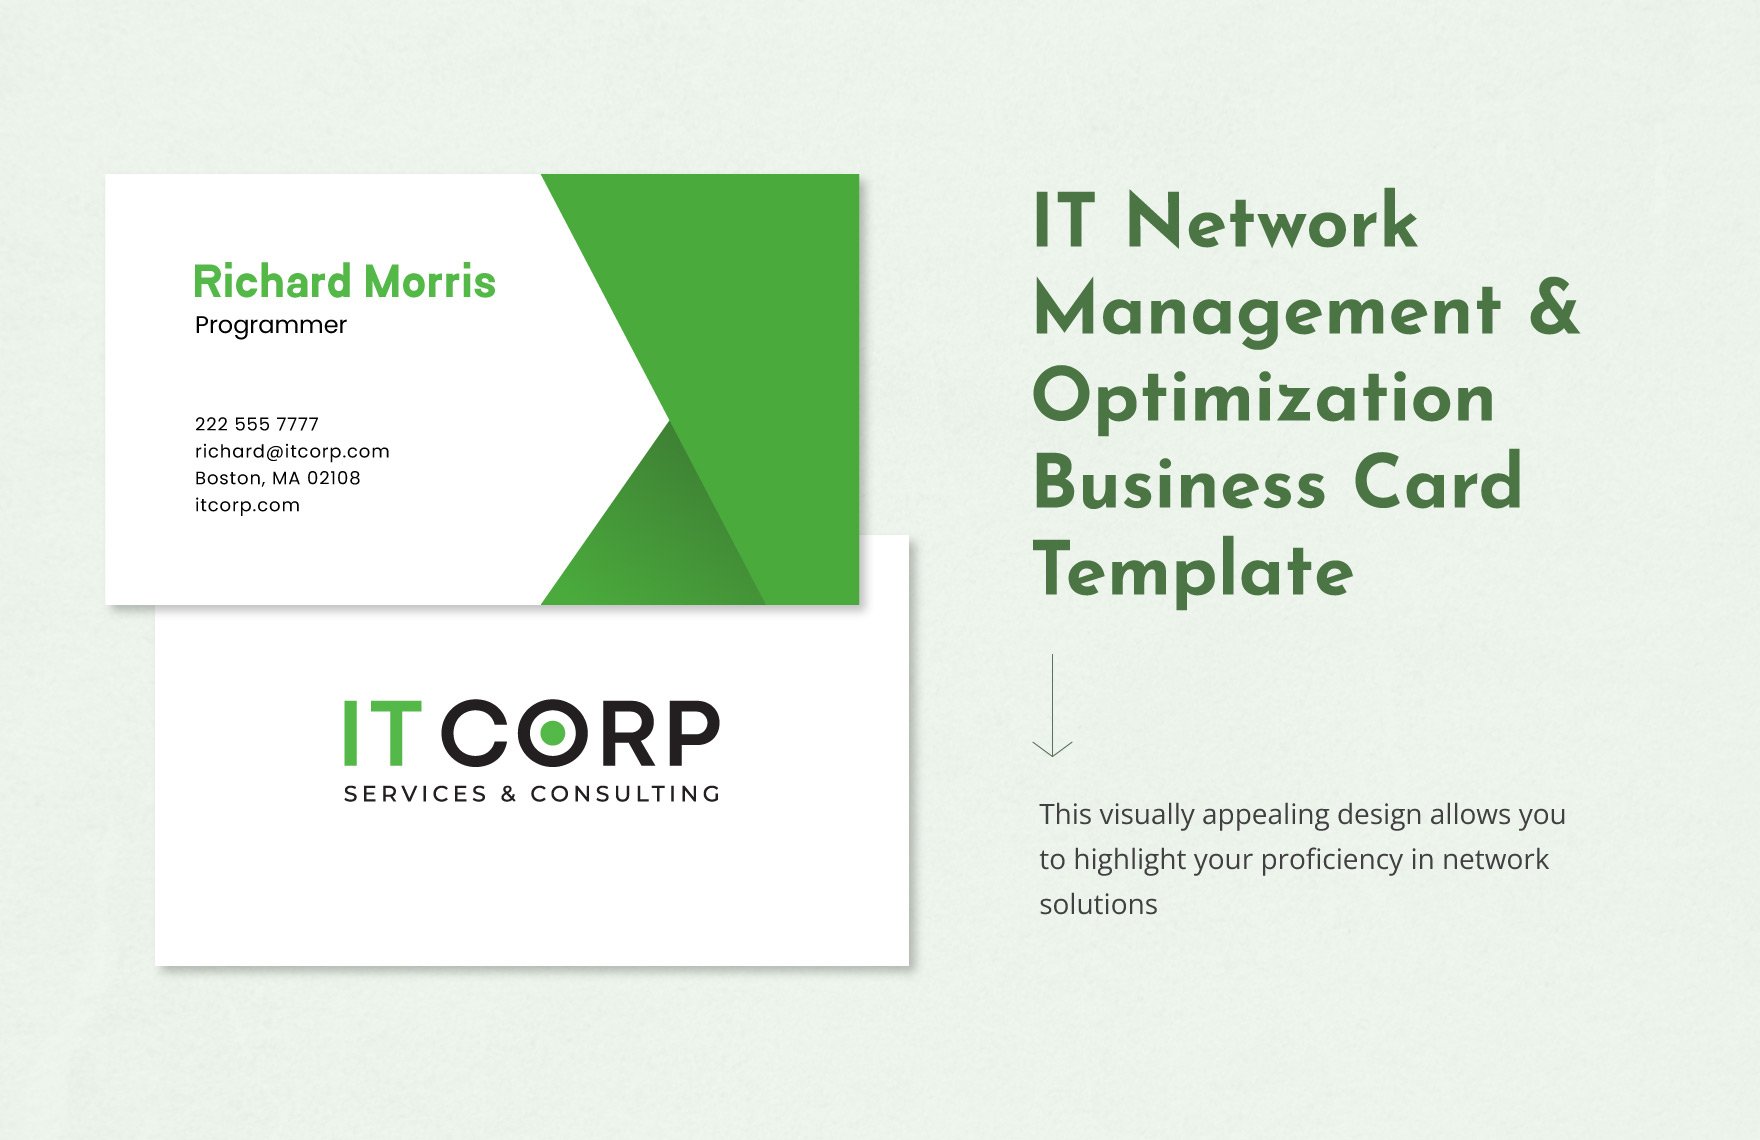 IT Network Management & Optimization Business Card Template in Word, Illustrator, PSD